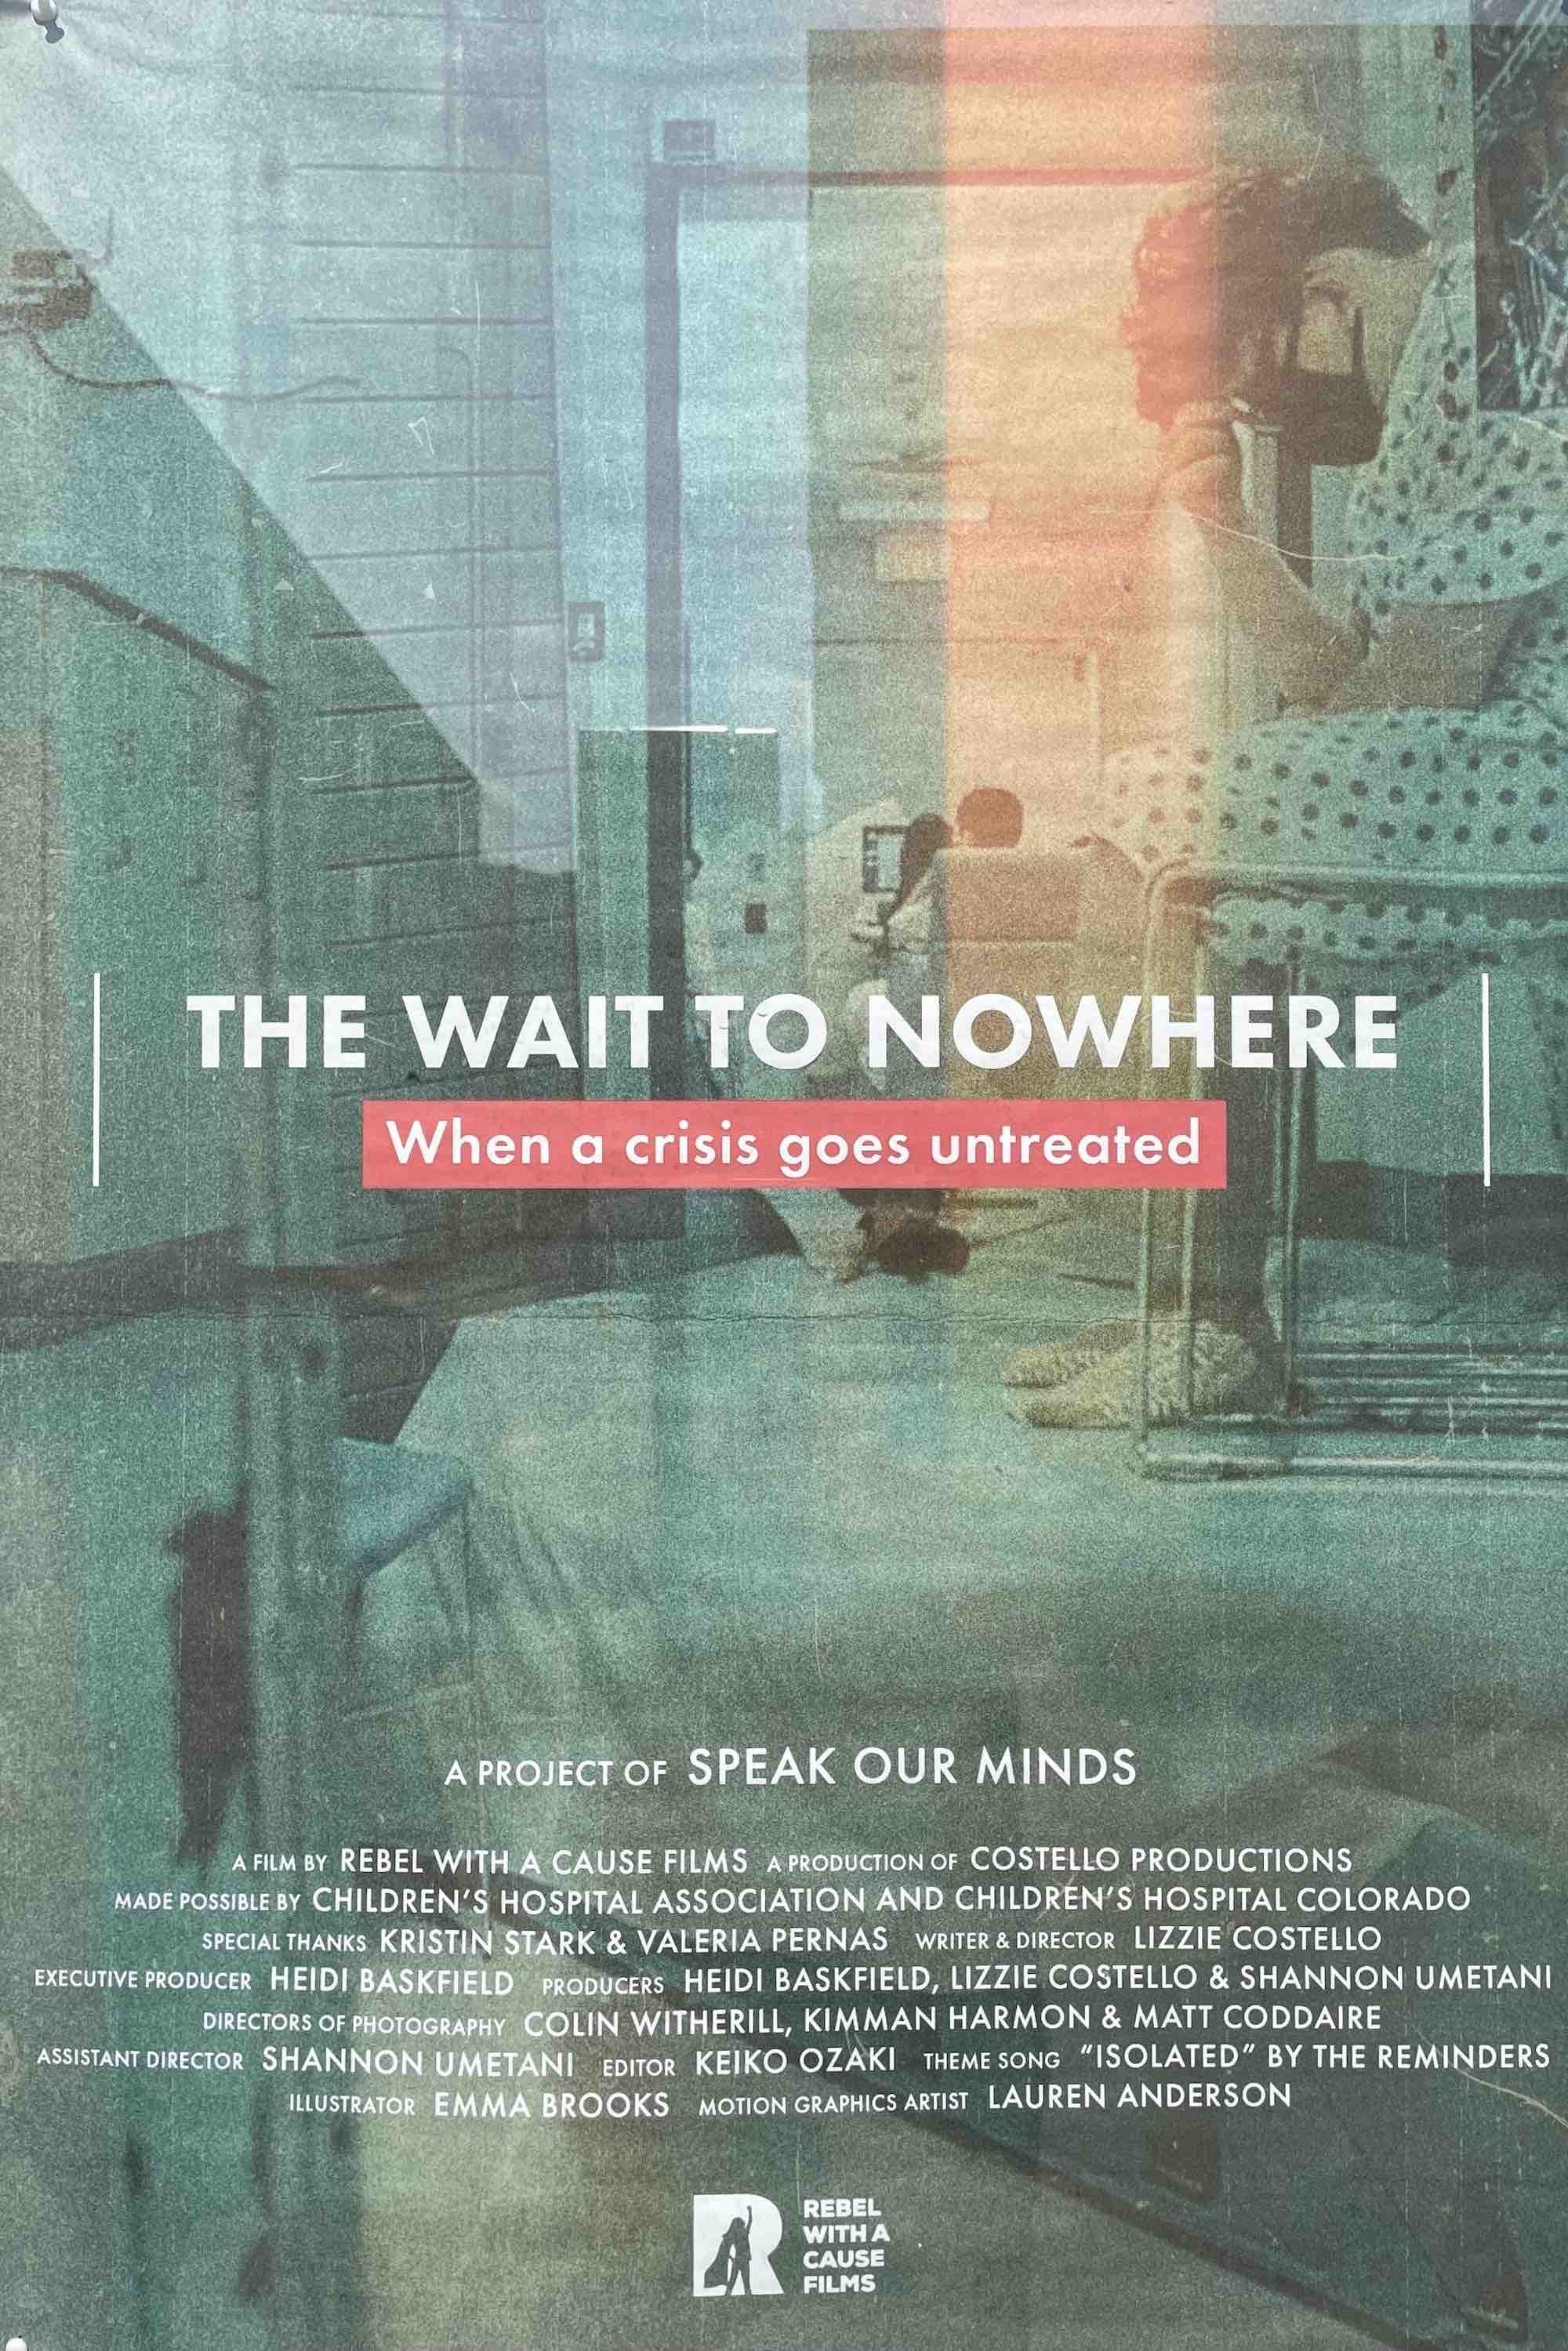 The Wait to Nowhere: When a Crisis Goes Untreated